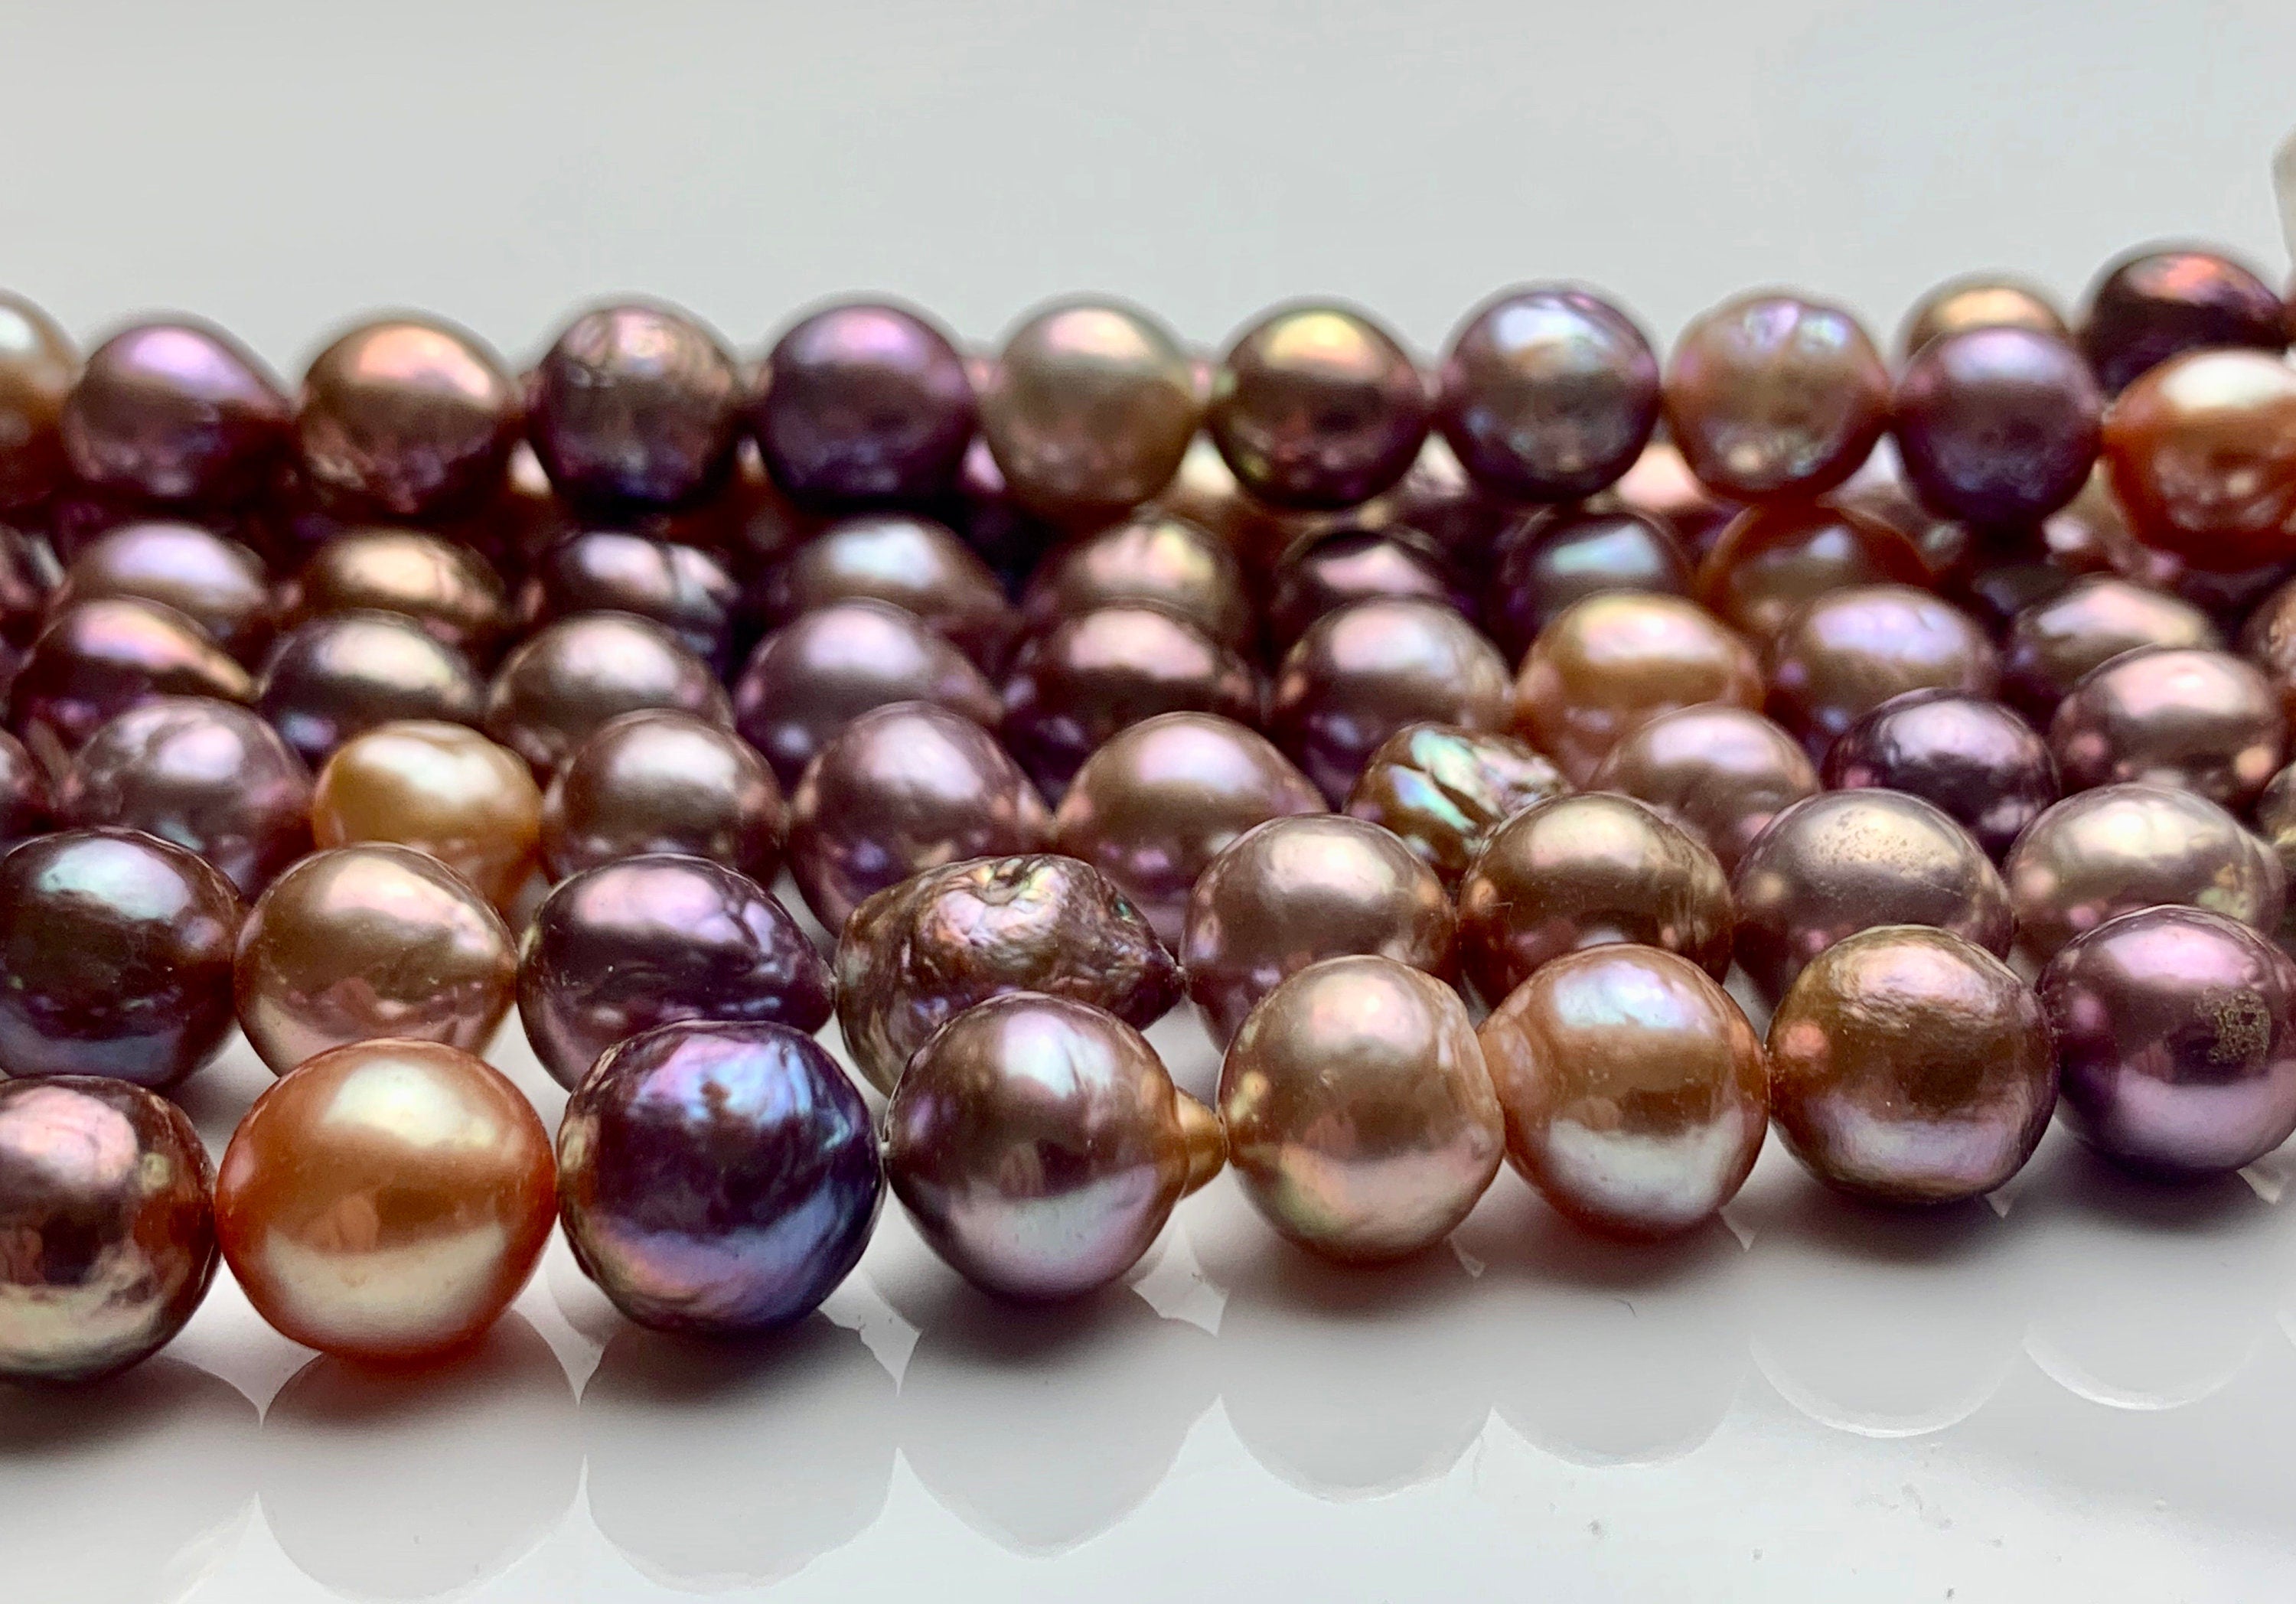 8-9.5mm AAAA Half Strand Large Hole Very Rare Dark Mauve Pink Baroque Pearl  Bead Hole 1.2mm Iridescent Color Edison Pearl 21 Pieces #P1313